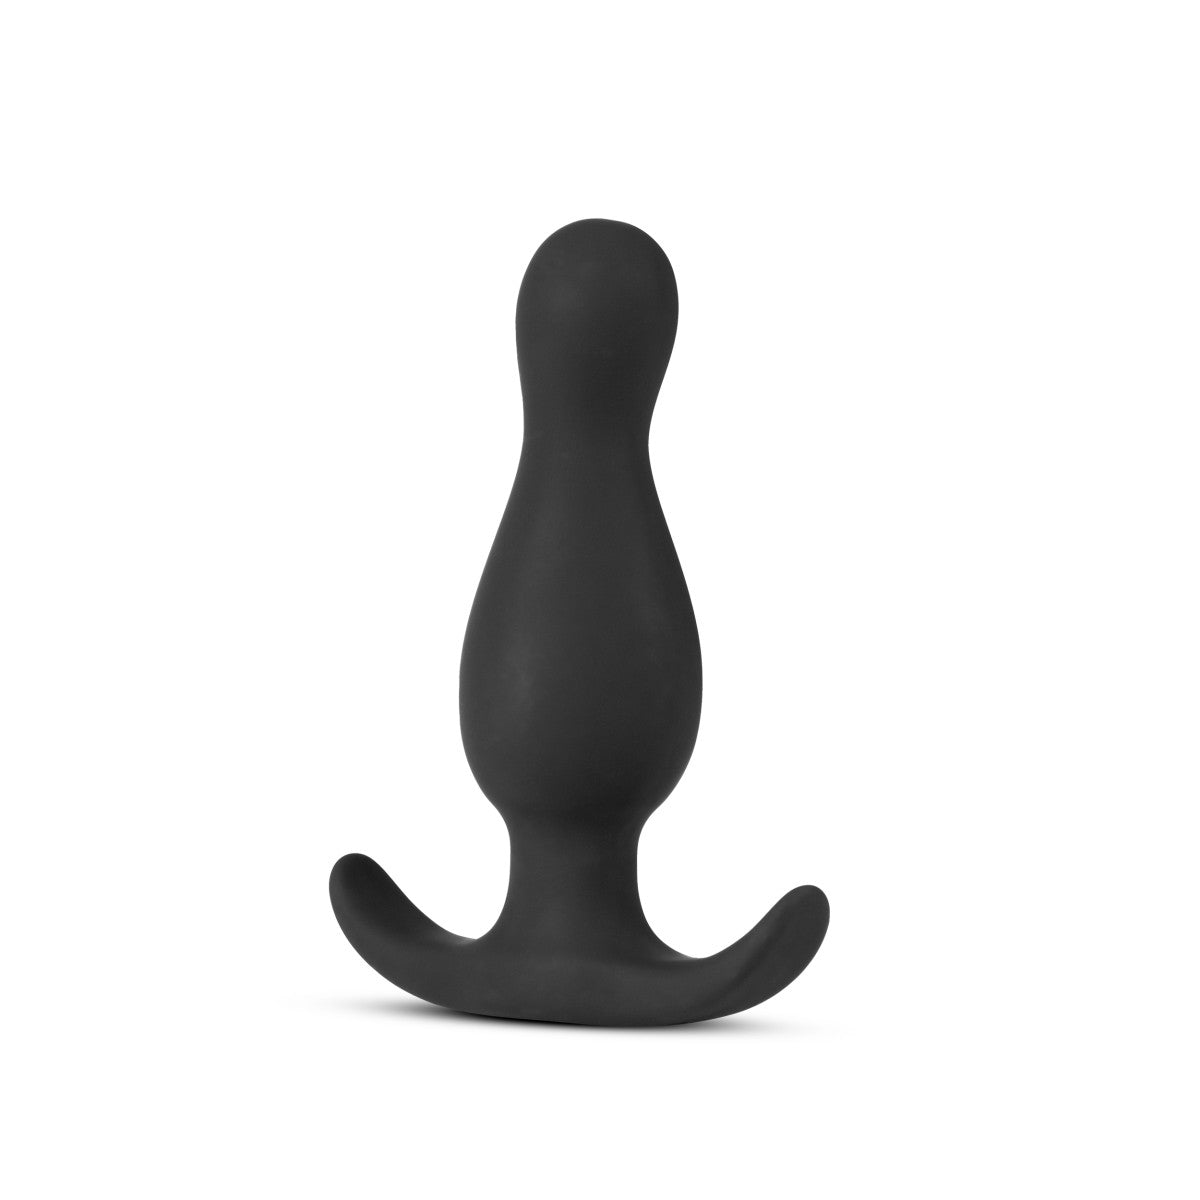 Black plug with flared anchor base and narrow neck. Plug features a slightly curved tip with a small bulbous area expanding into a larger long bulbous area near the base. Additional images show alternate angles and highlight features as listed in description and/or bullet points.